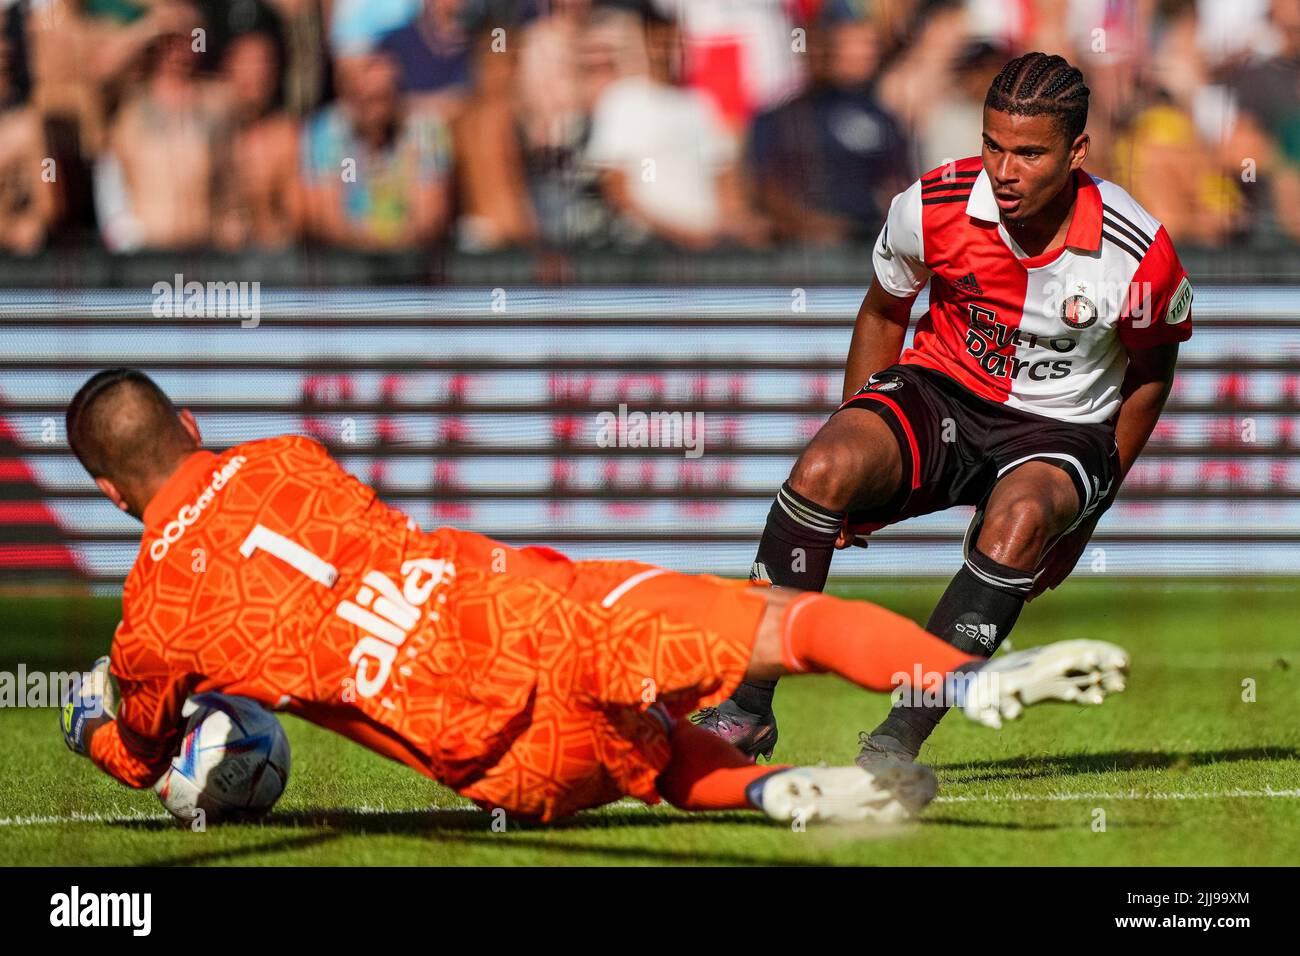 Rotterdam, Netherlands. 24 July 2022, Rotterdam - Olympique Lyon keeper Anthony Lopes, Denzel Hall of Feyenoord during the match between Feyenoord v Olympique Lyon at Stadion Feijenoord De Kuip on 24 July 2022 in Rotterdam, Netherlands. (Box to Box Pictures/Tom Bode) Stock Photo